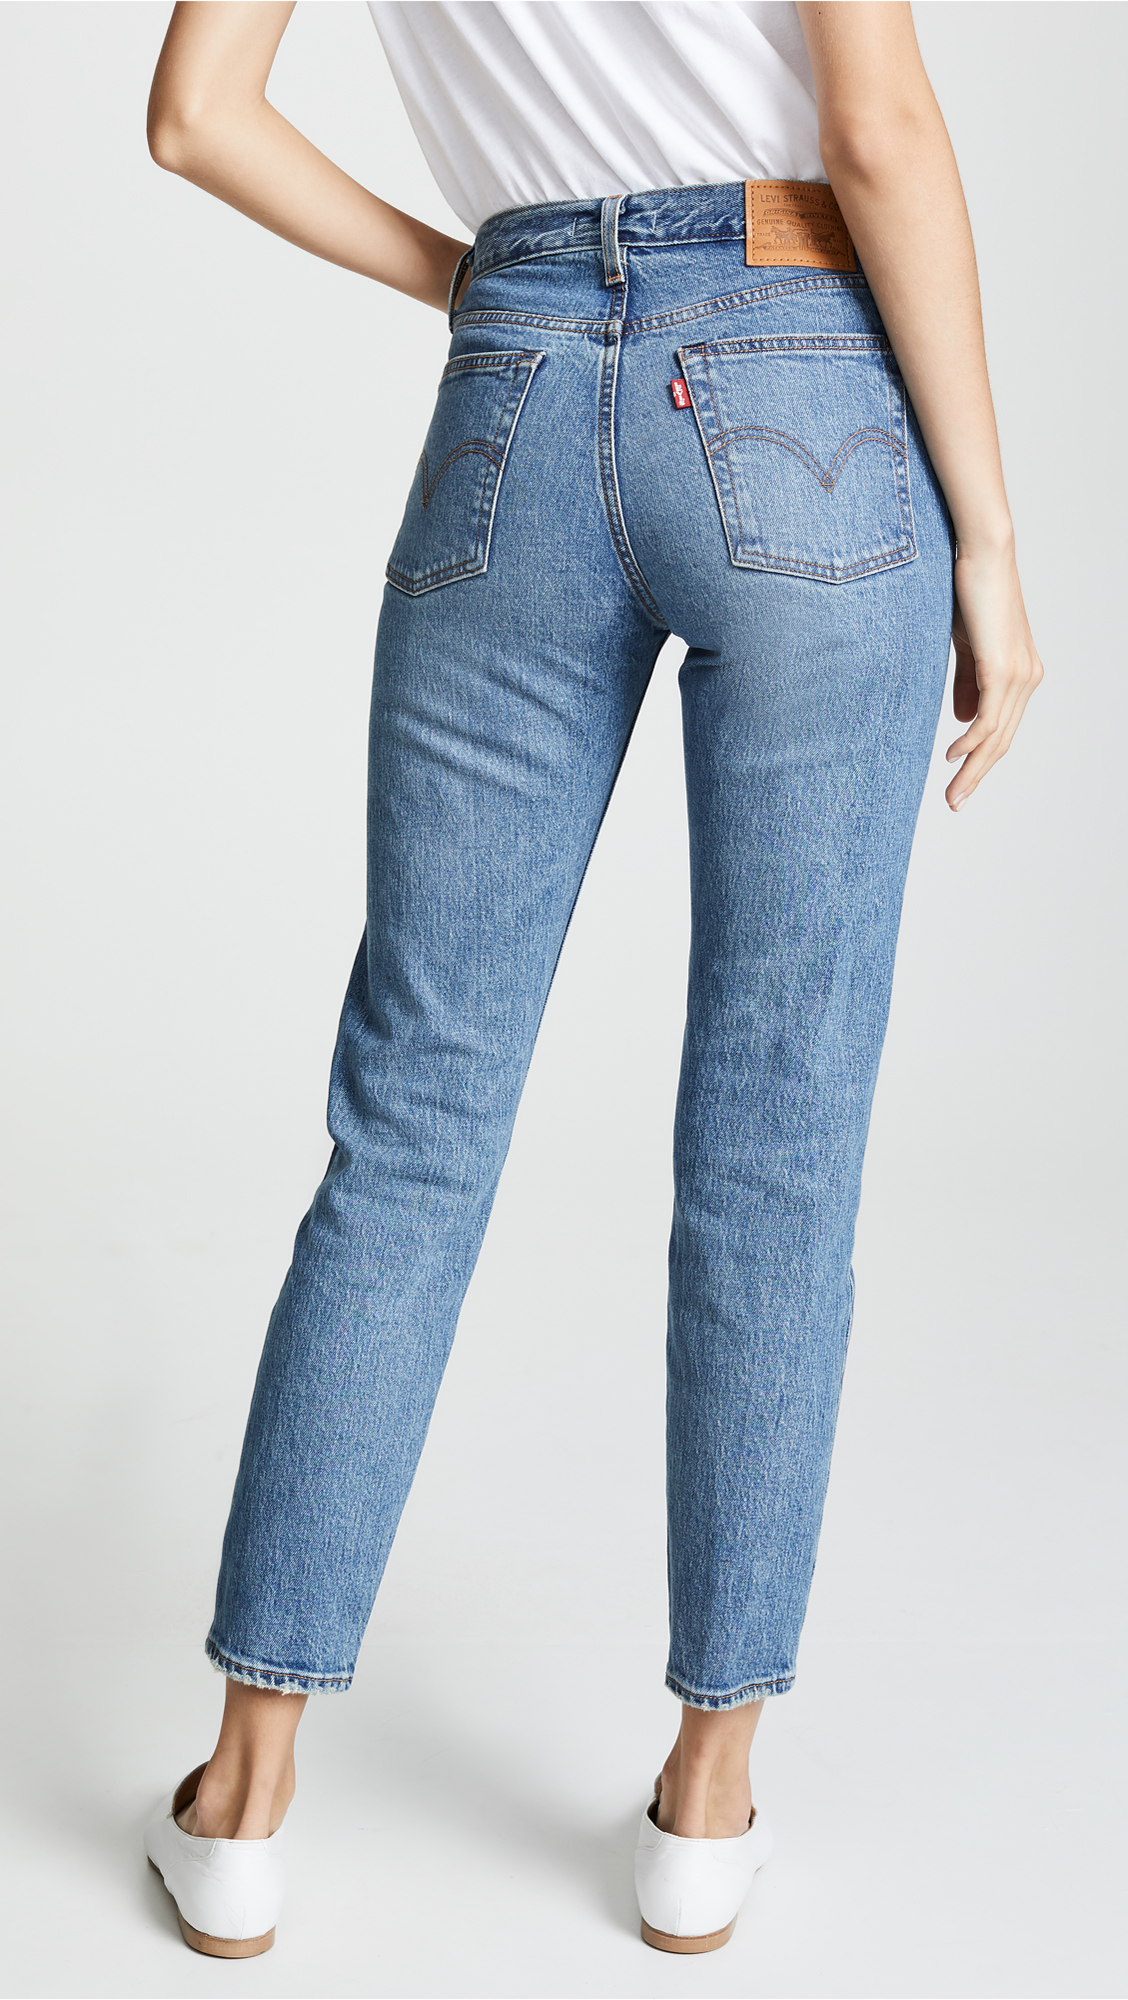 These 24 Sculpting Jeans Will Make Your Butt Look Great | Who What Wear